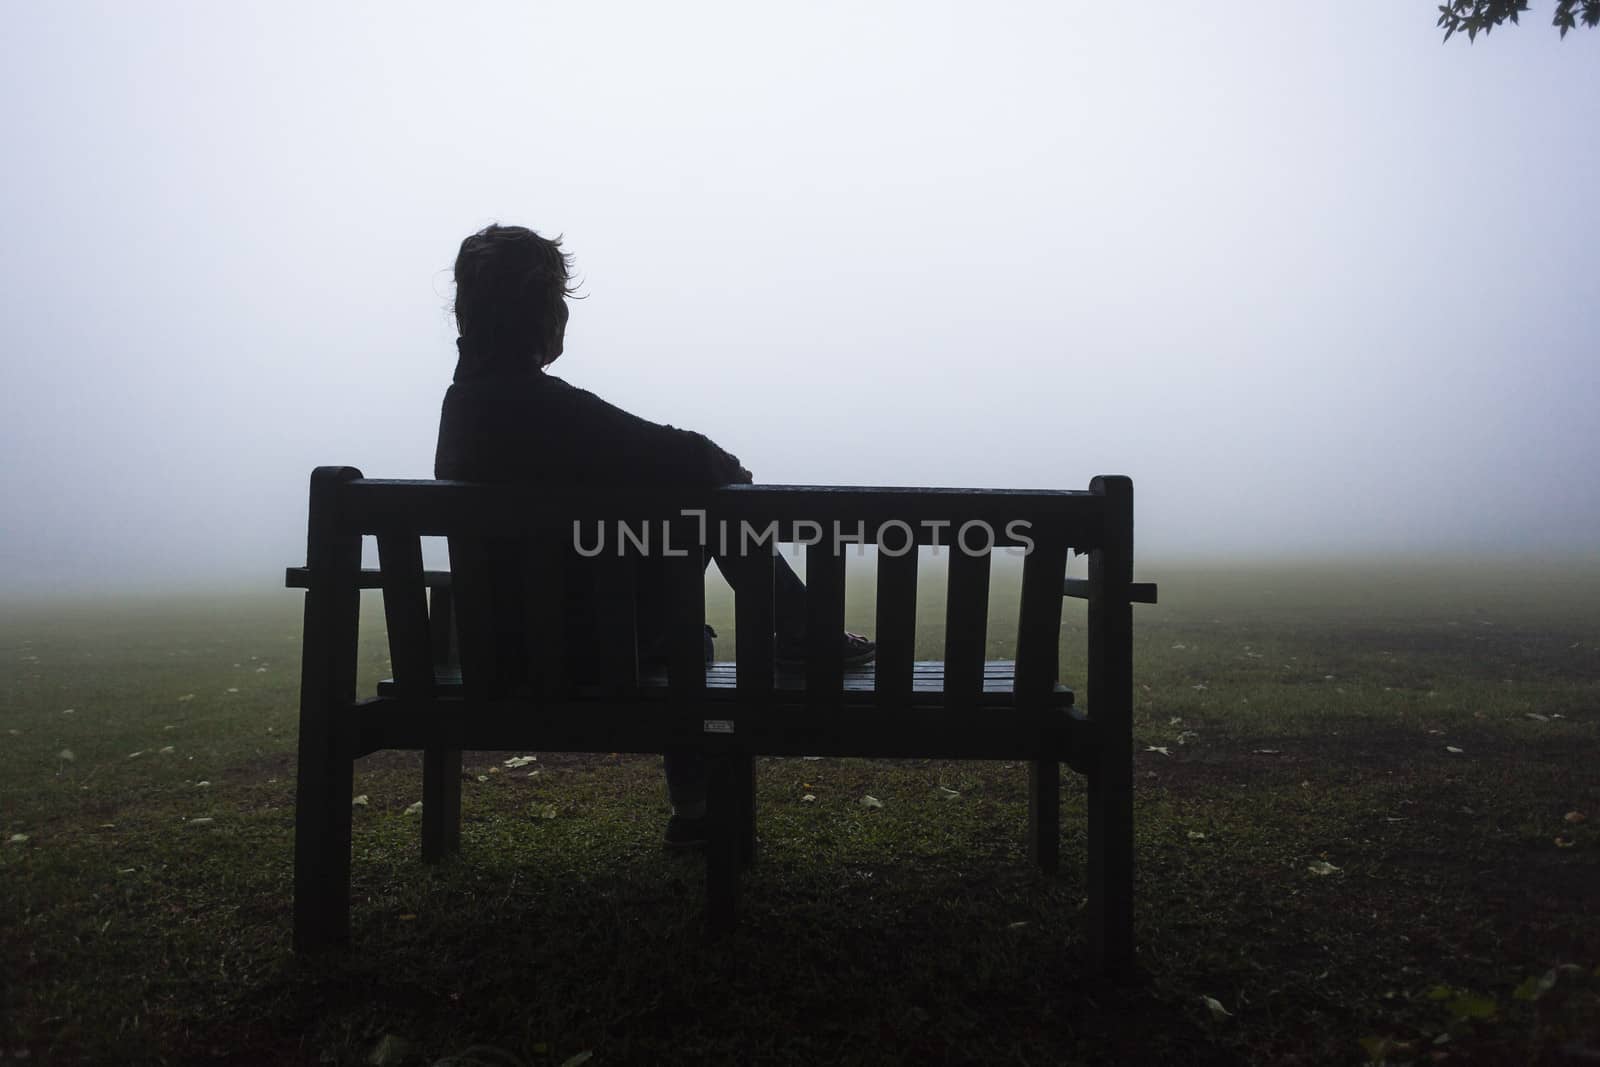 Woman seated on bench looks into the mist with faith pending future days.